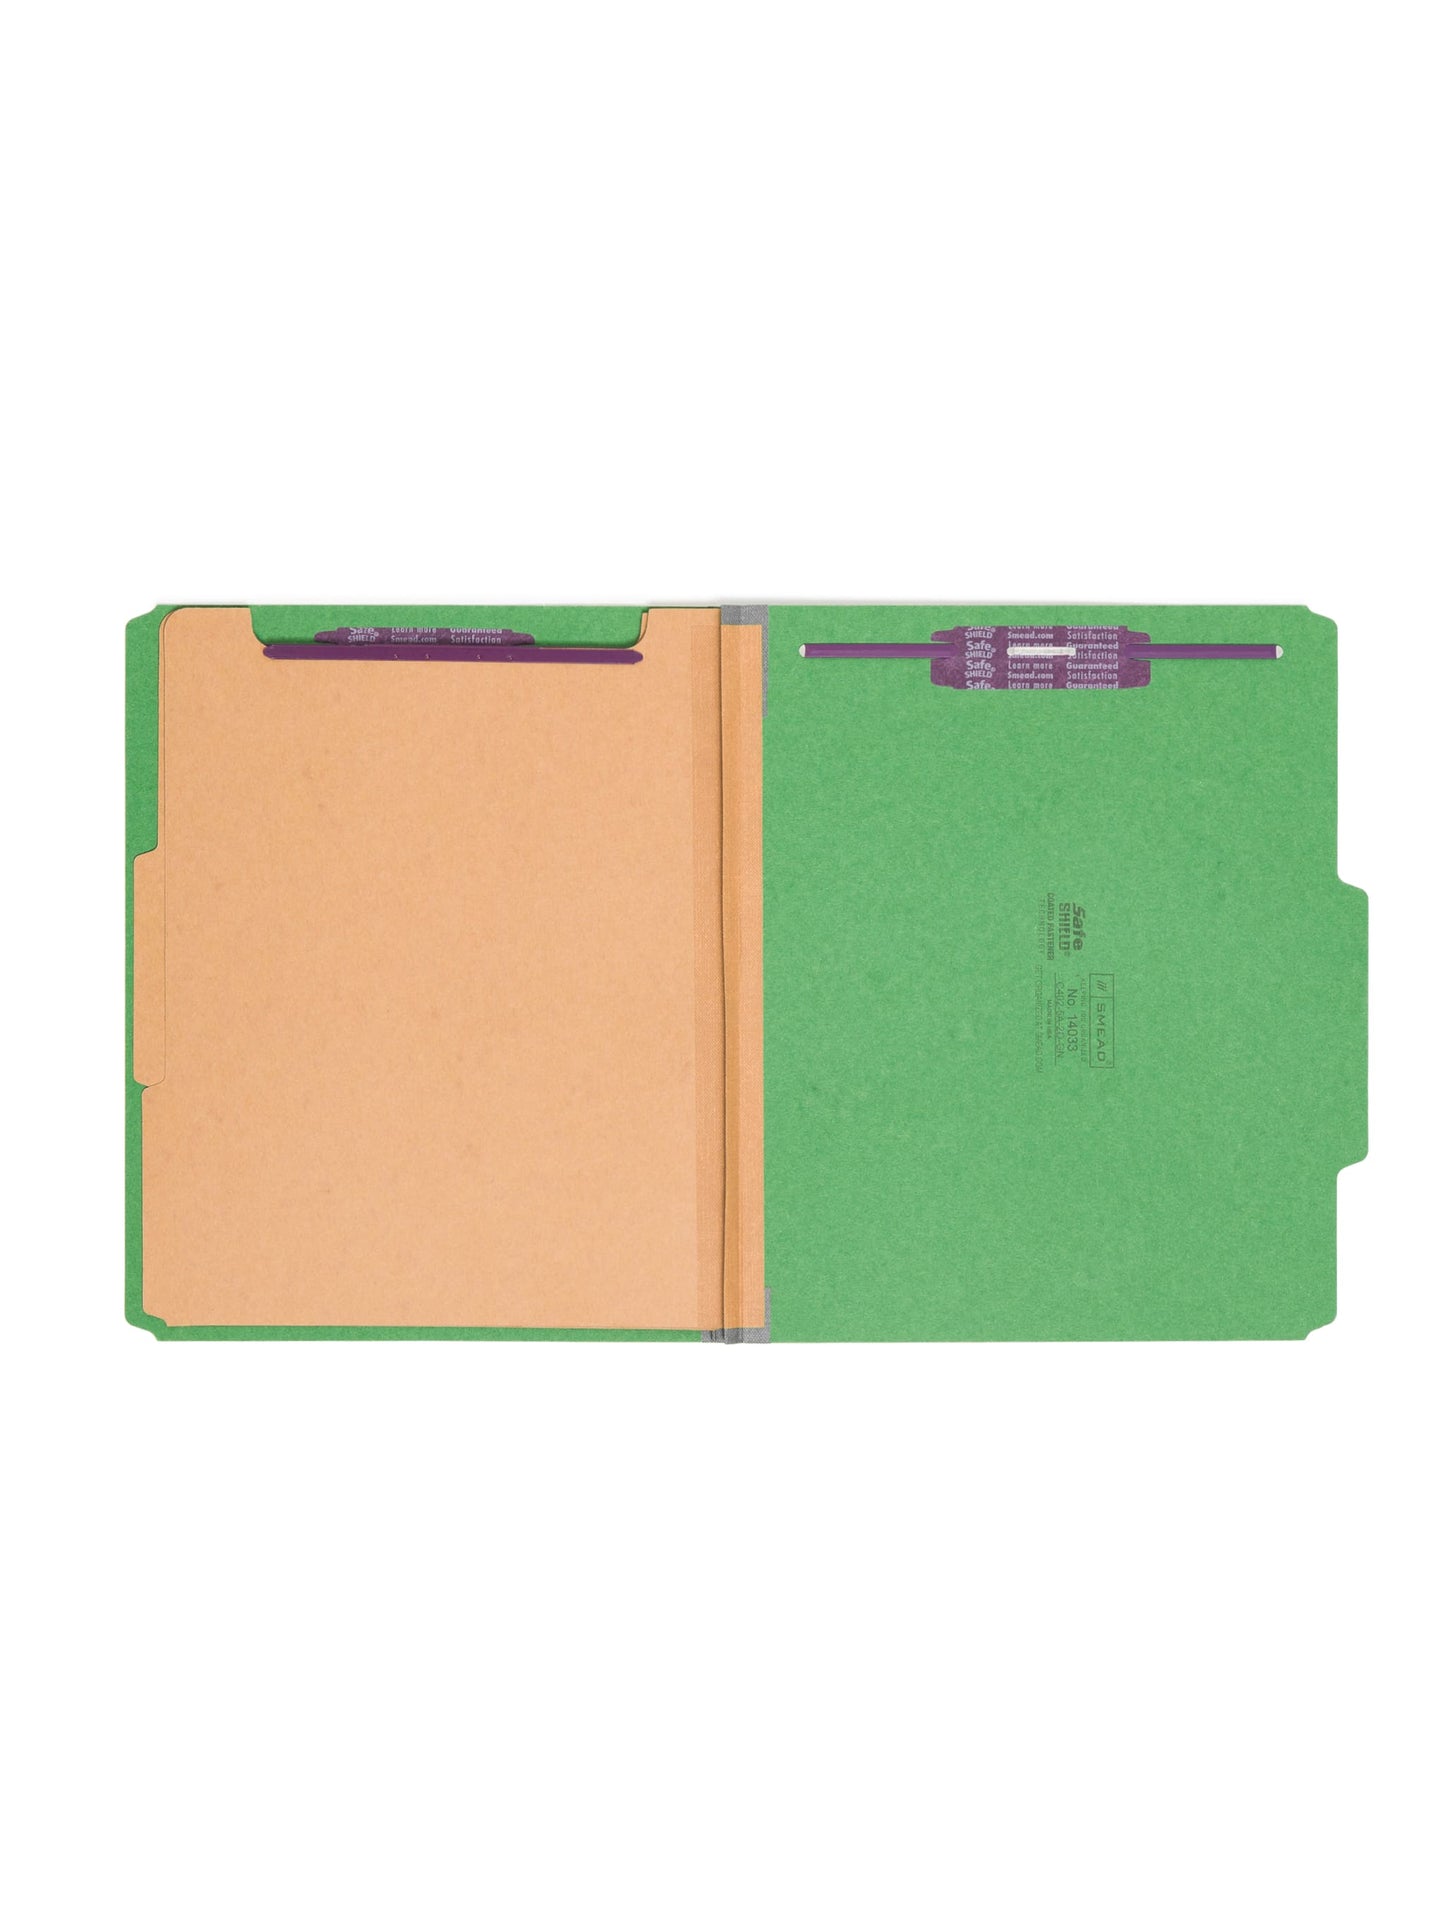 SafeSHIELD® Pressboard Classification File Folders, 2 Dividers, 2 inch Expansion, 2/5-Cut Tab, Green Color, Letter Size, Set of 0, 30086486140332